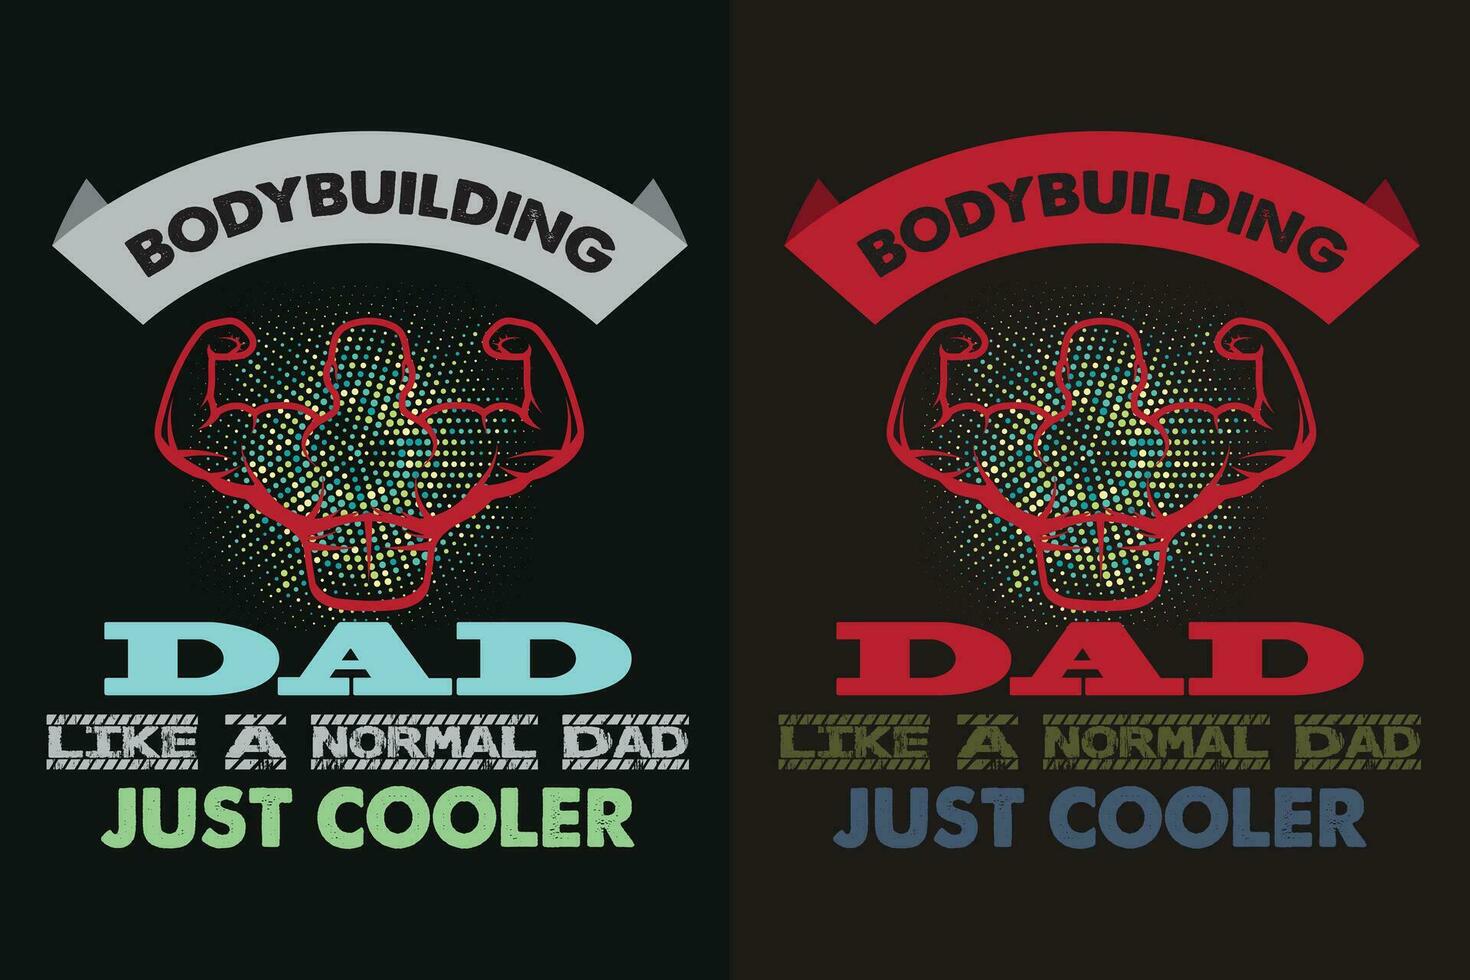 https://static.vecteezy.com/system/resources/previews/026/276/198/non_2x/bodybuilding-dad-like-a-normal-dad-just-cooler-gym-shirt-workout-shirt-gym-lover-shirt-fitness-shirt-sports-lover-gift-gift-for-gym-lover-sports-shirt-cute-gym-shirt-workout-tee-vector.jpg